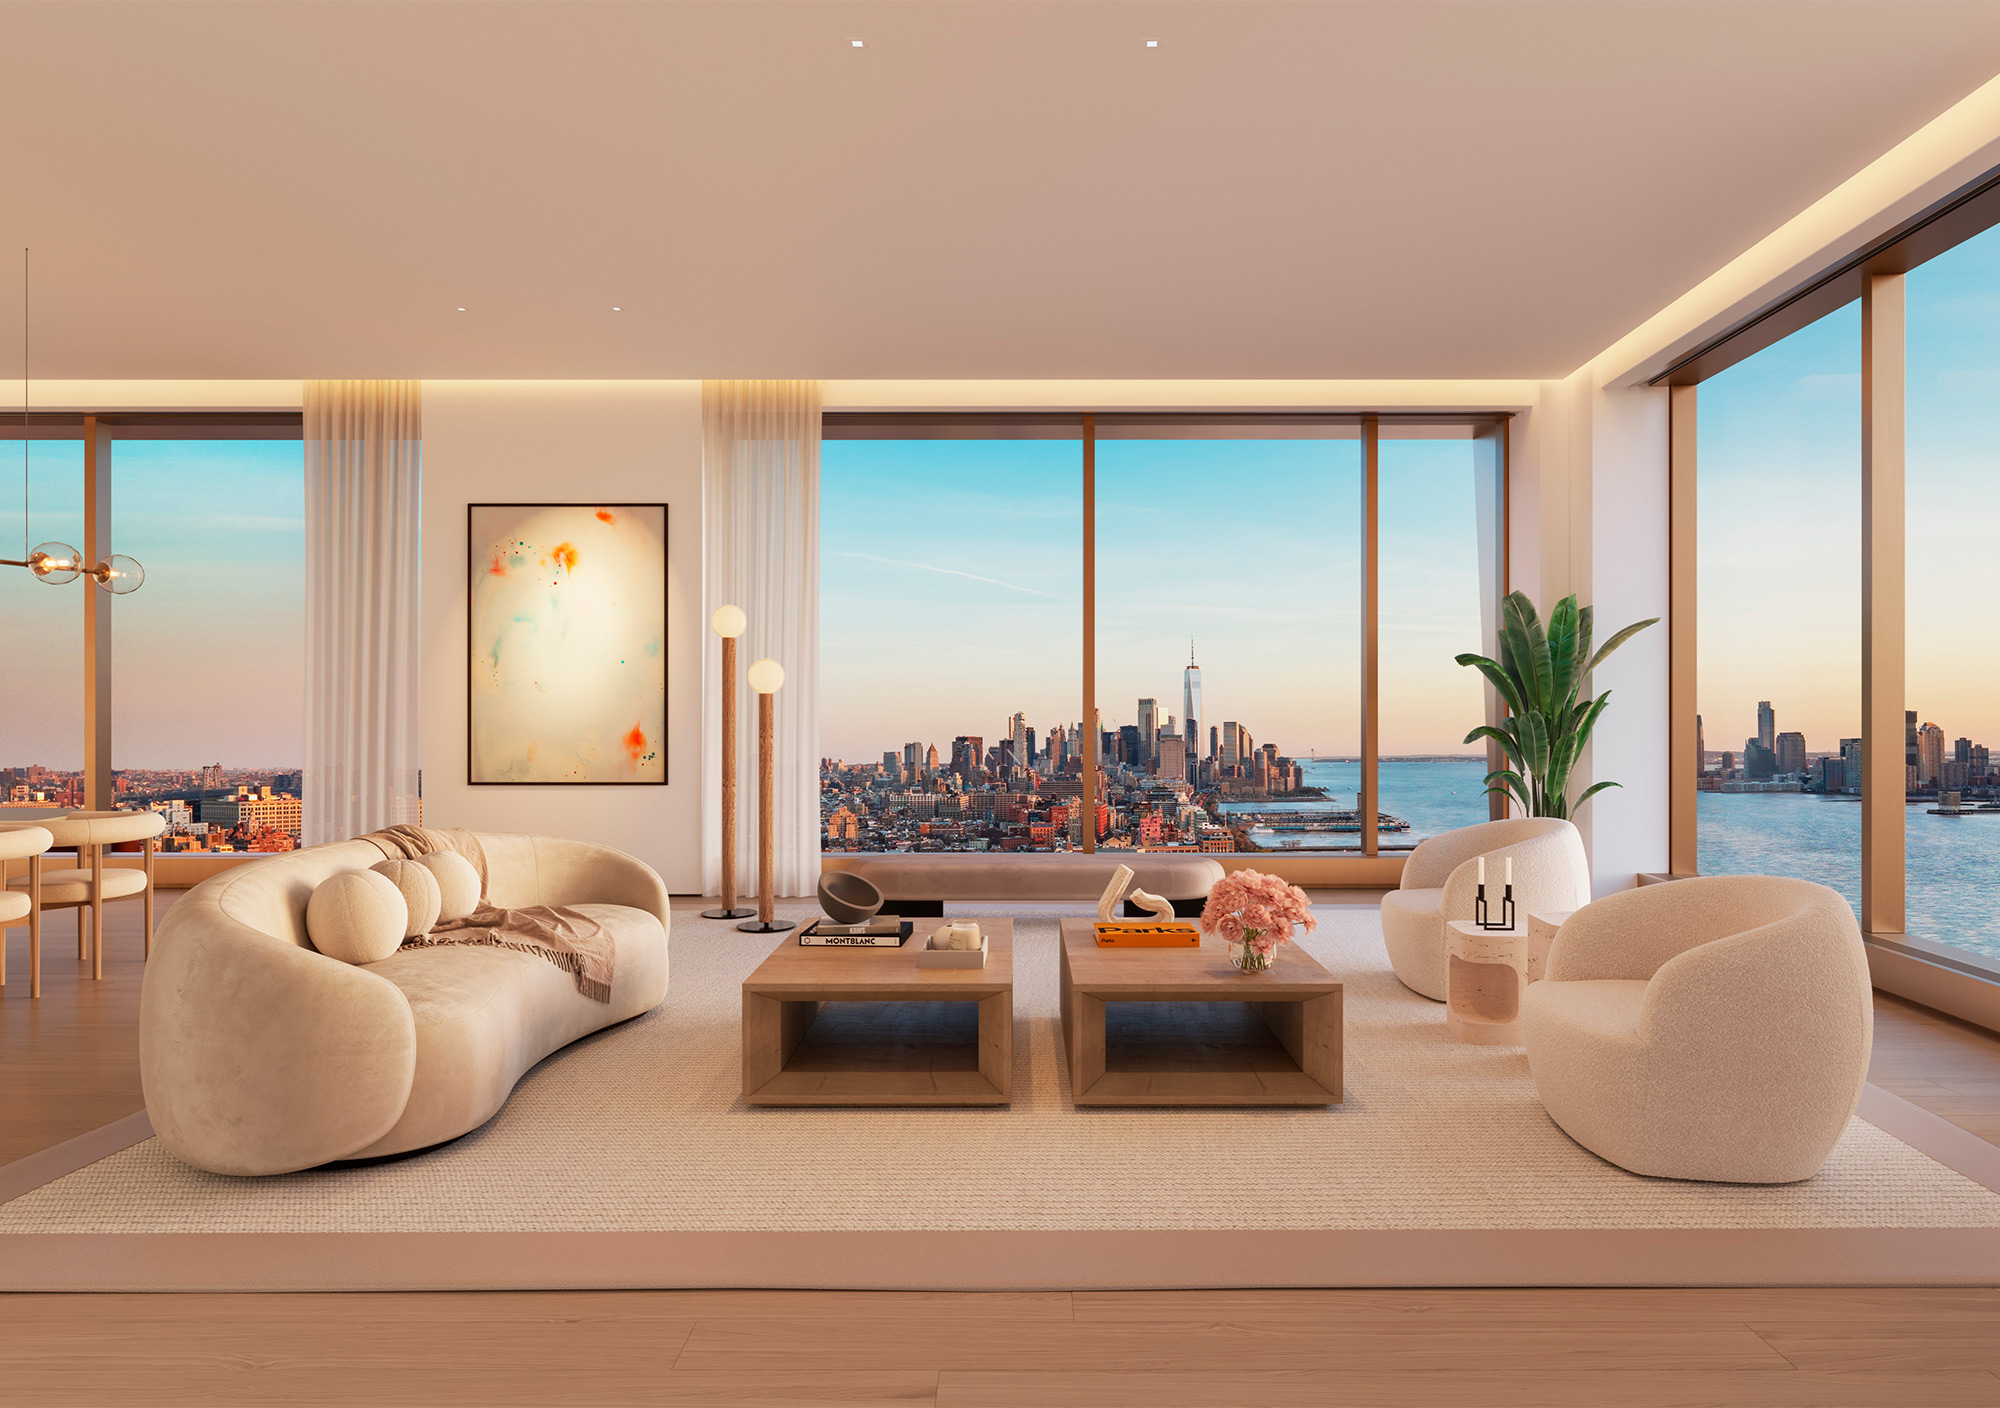 Luxurious living room with creme furniture overlooking Hudson River and skyline